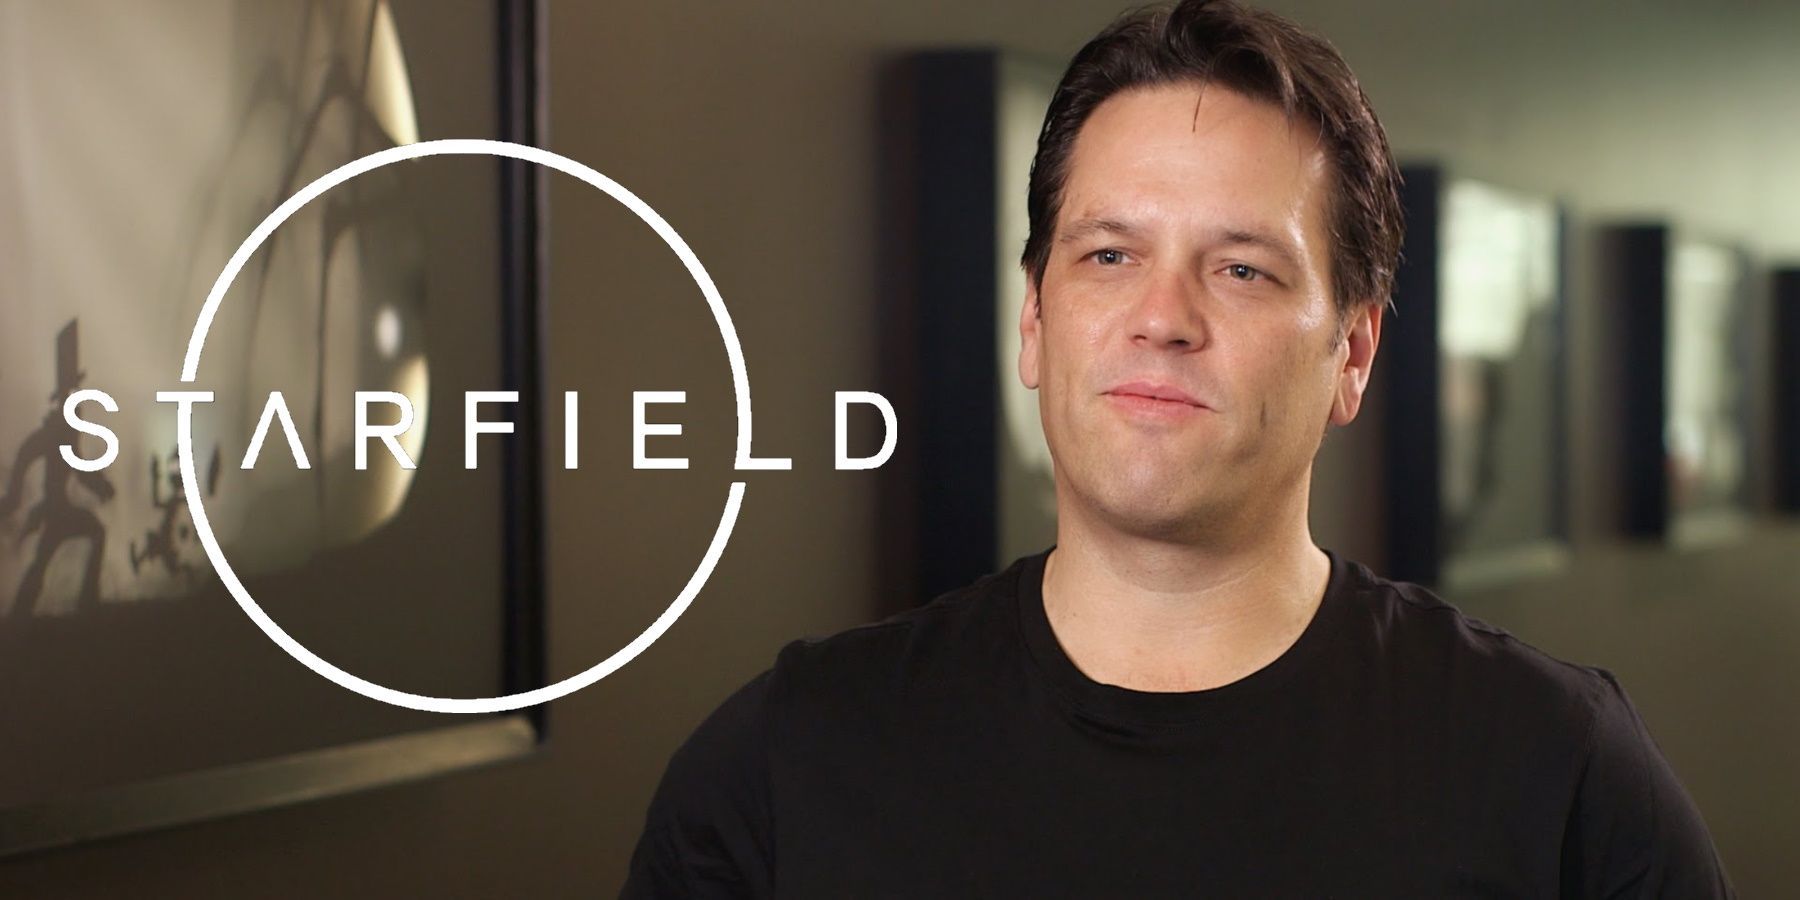 Starfield mods let Phil Spencer and Todd Howard be a light in dark places